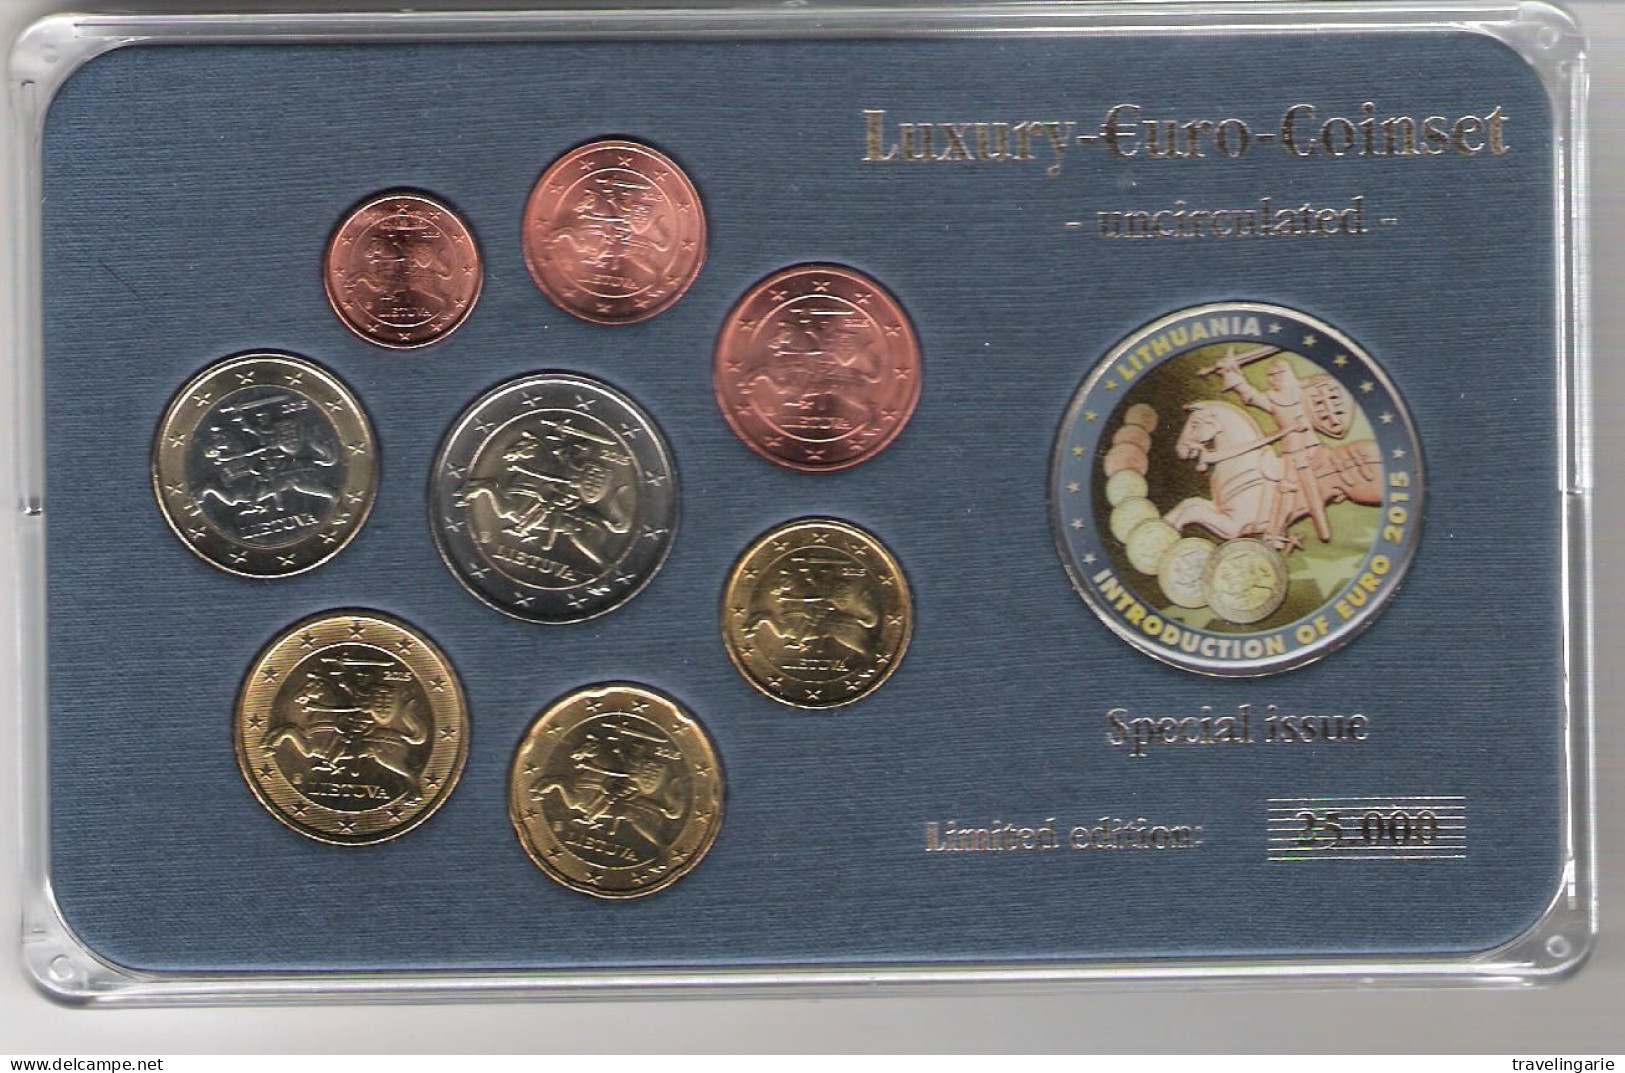 Lithuania 2015 Euro Set Blister With Coloured Medal "introduction Of The Euro" BU/UNC - Lithuania